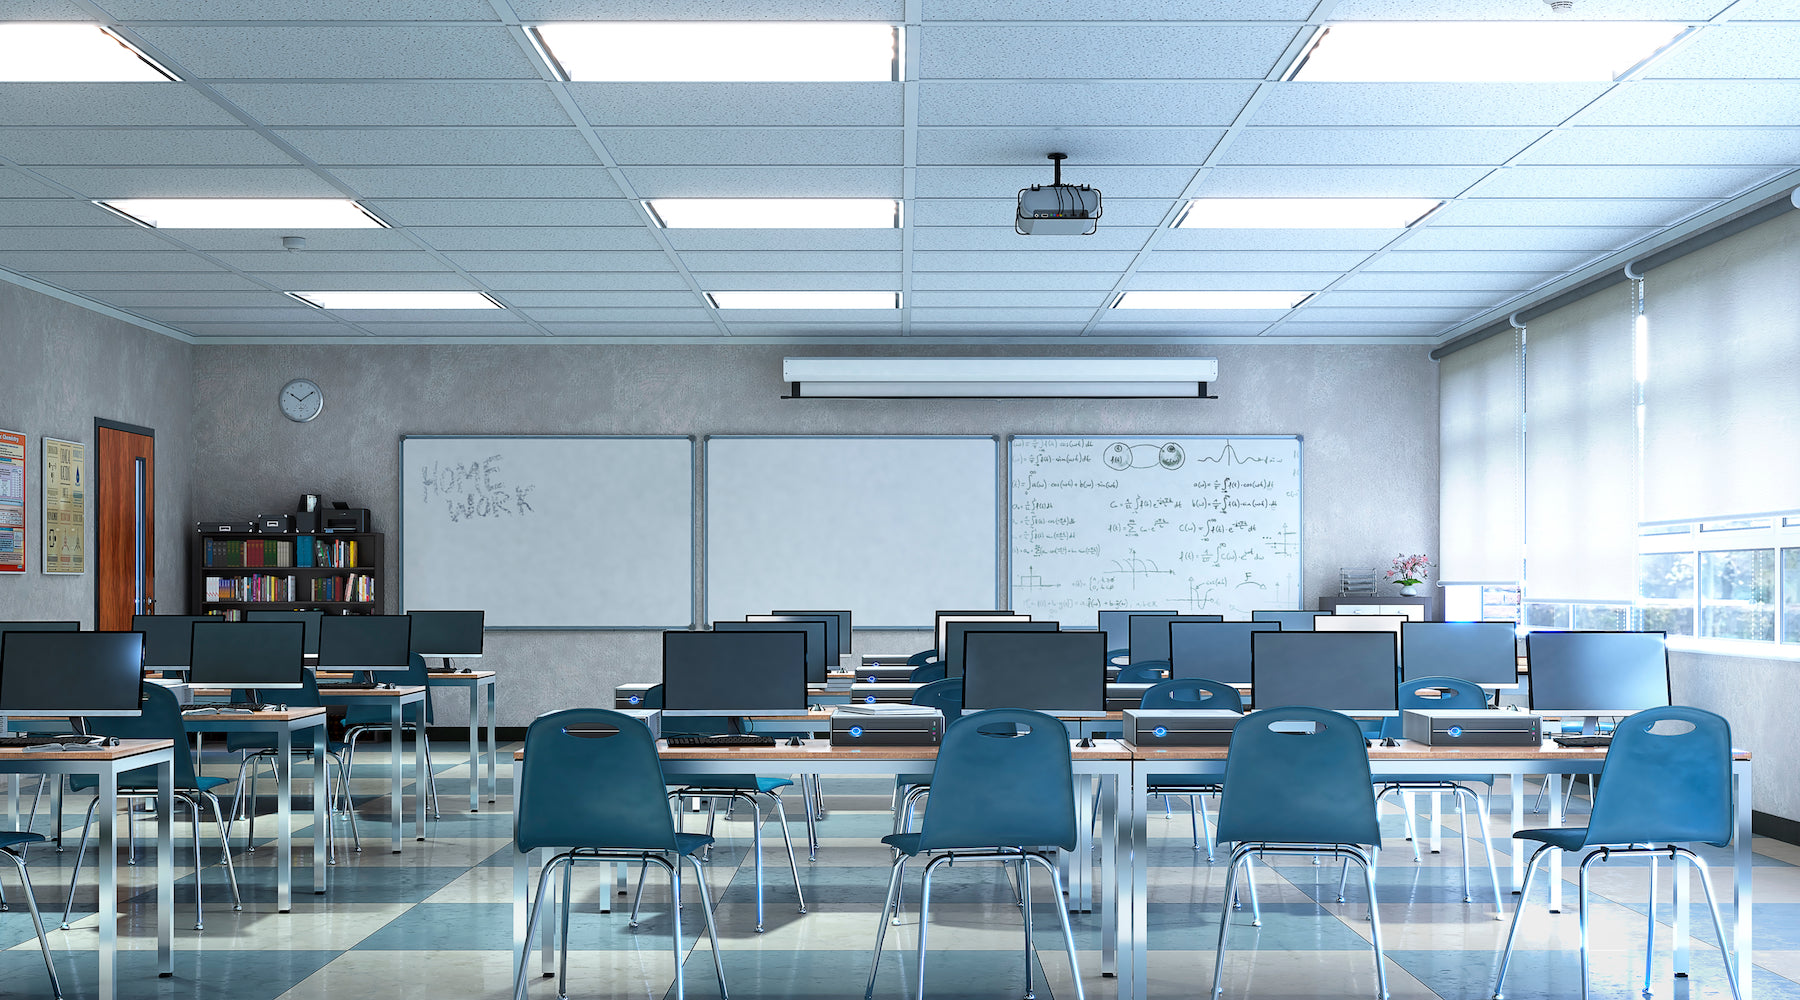 Classroom Lighting | Classroom Light Fixtures and LED Lights for Classrooms